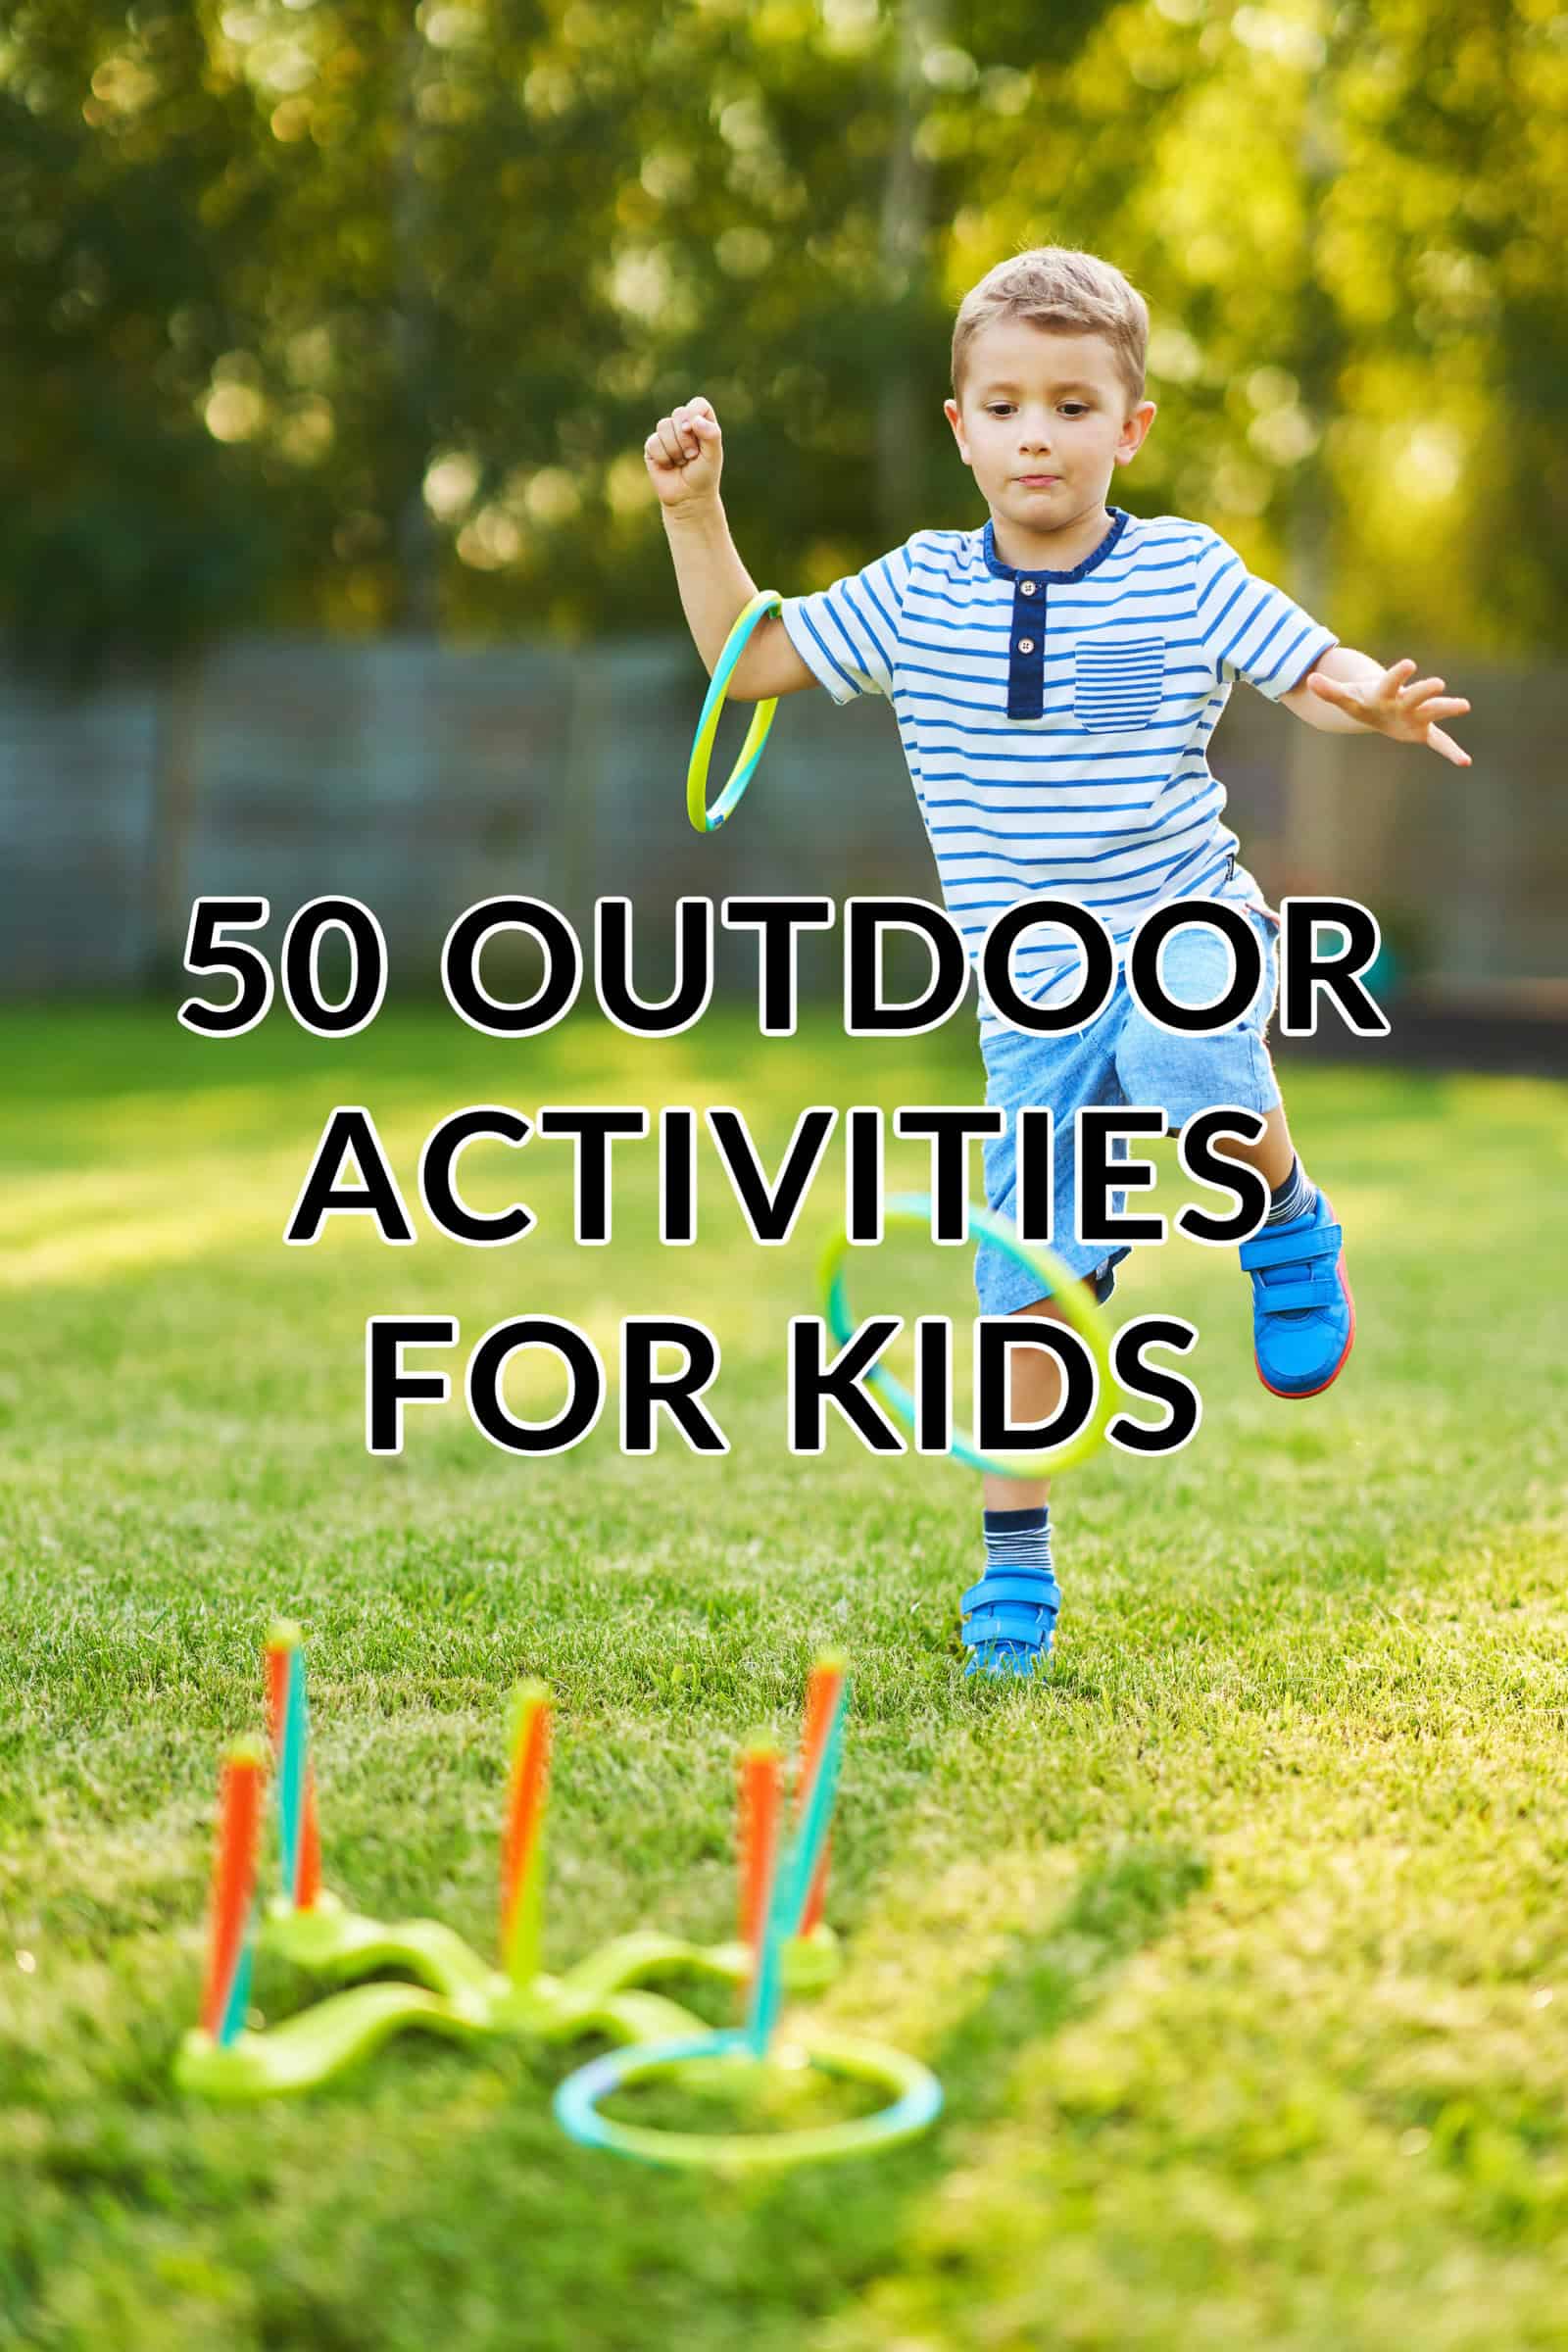 50+ Outdoor Activities for Kids (of all ages!) - Busy Toddler